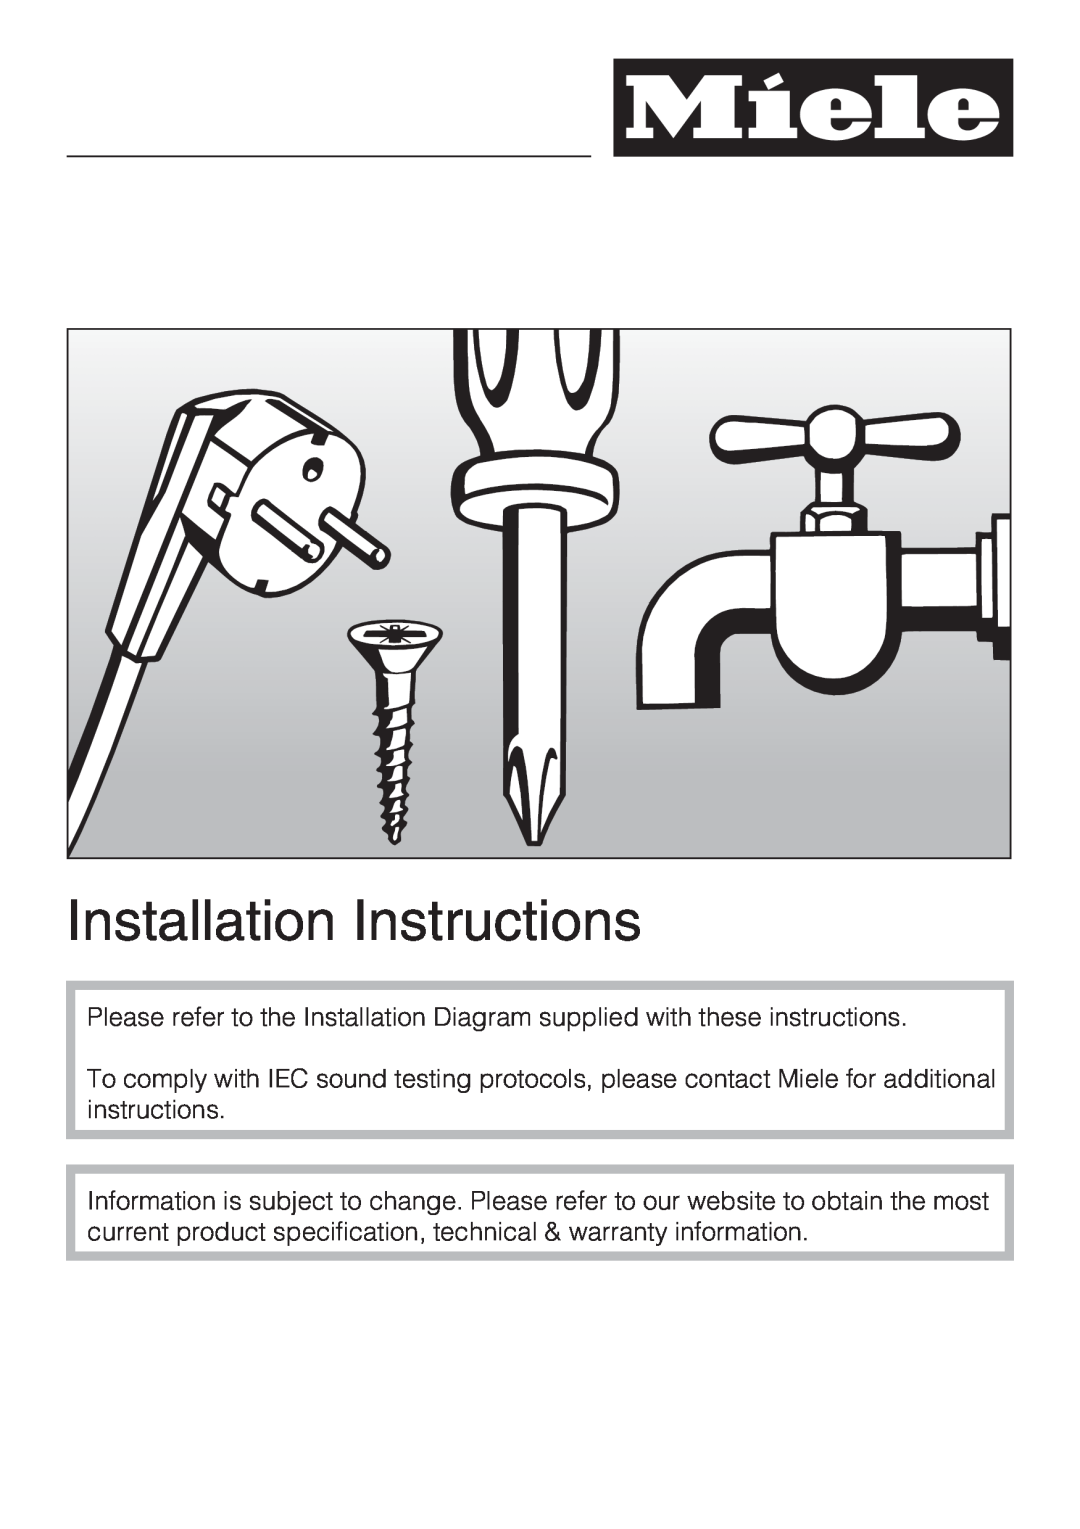 Miele G 1472, G 2472 manual Installation Instructions 